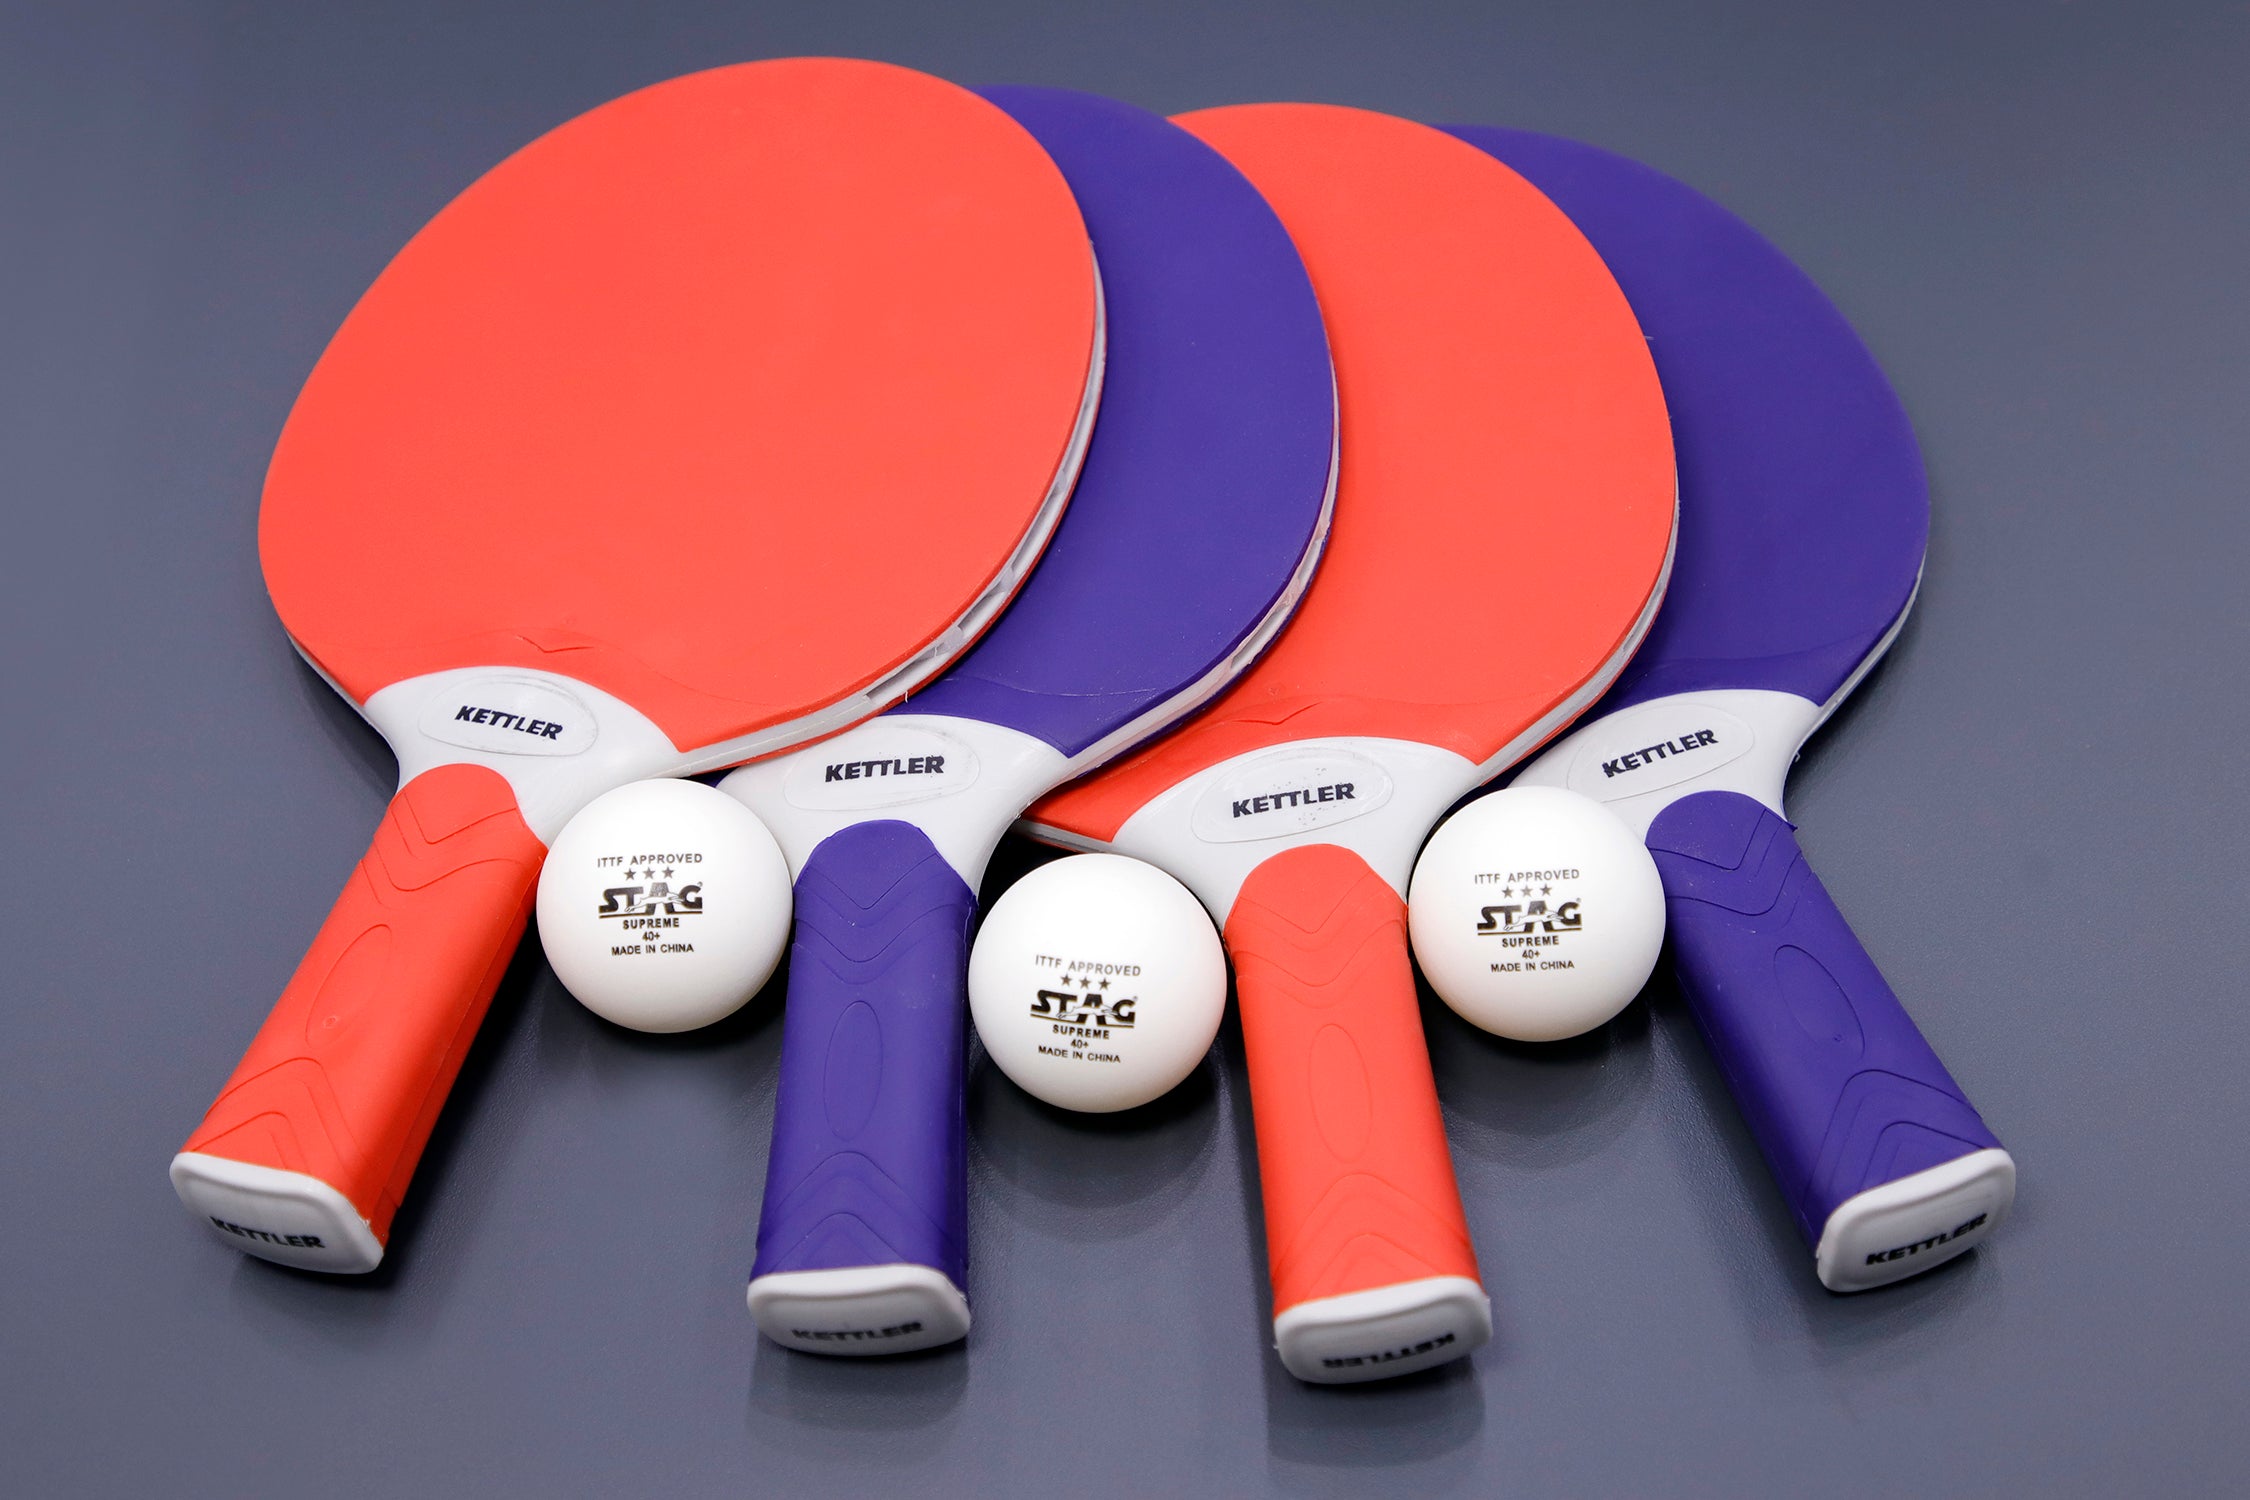 4-Player outdoor bundle included with ping pong table